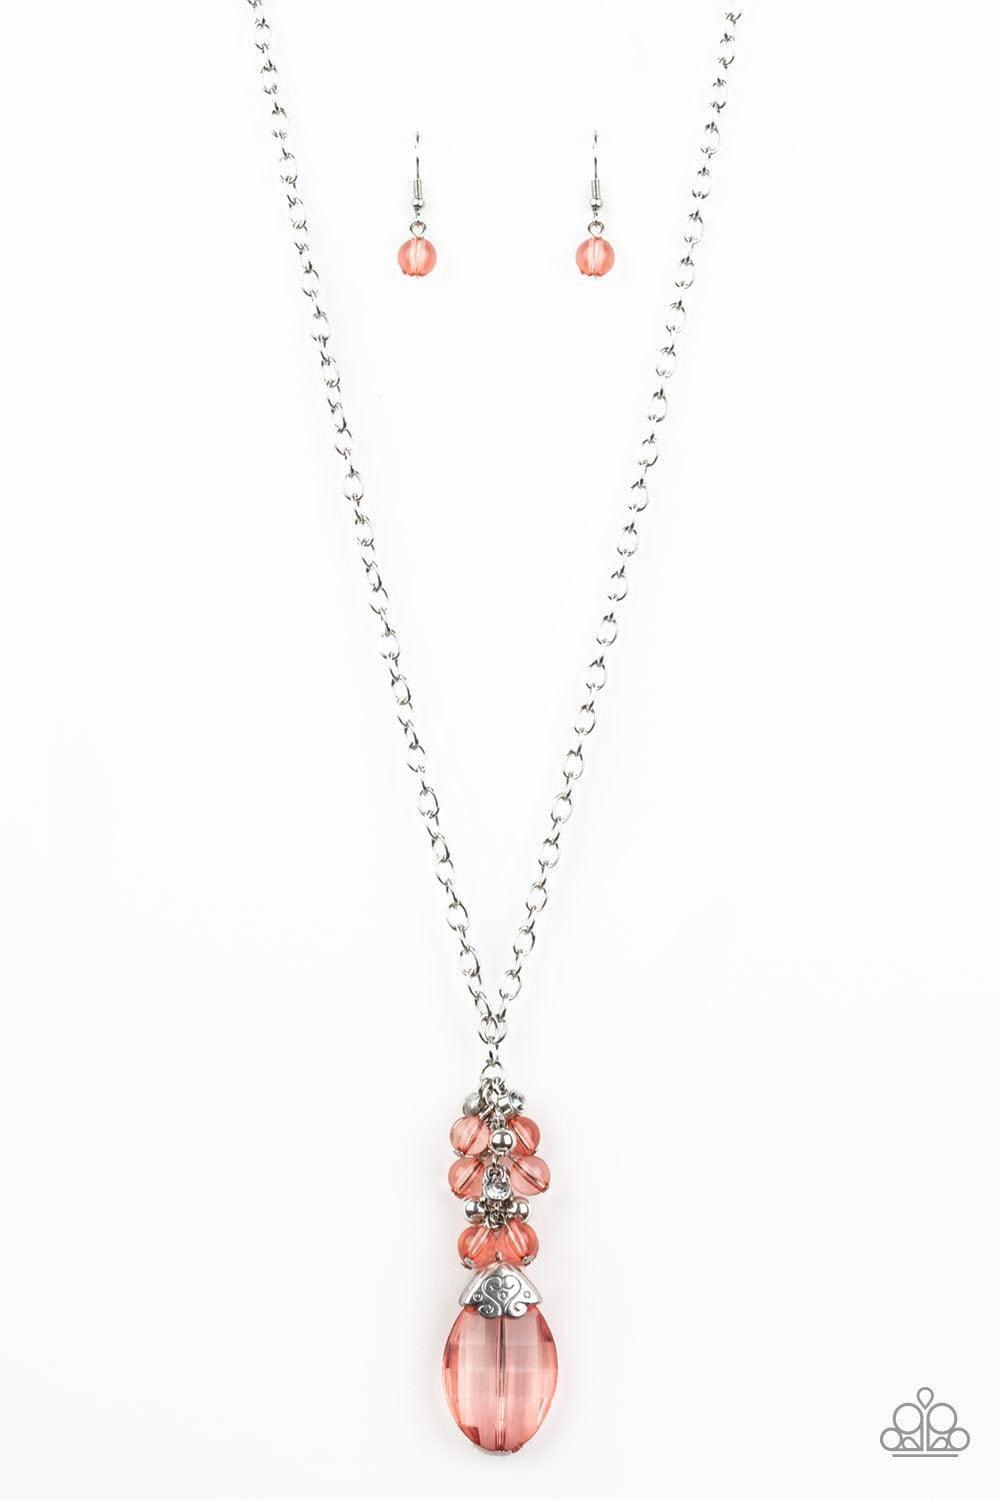 Paparazzi Accessories - Crystal Cascade - Coral Necklace - Bling by JessieK